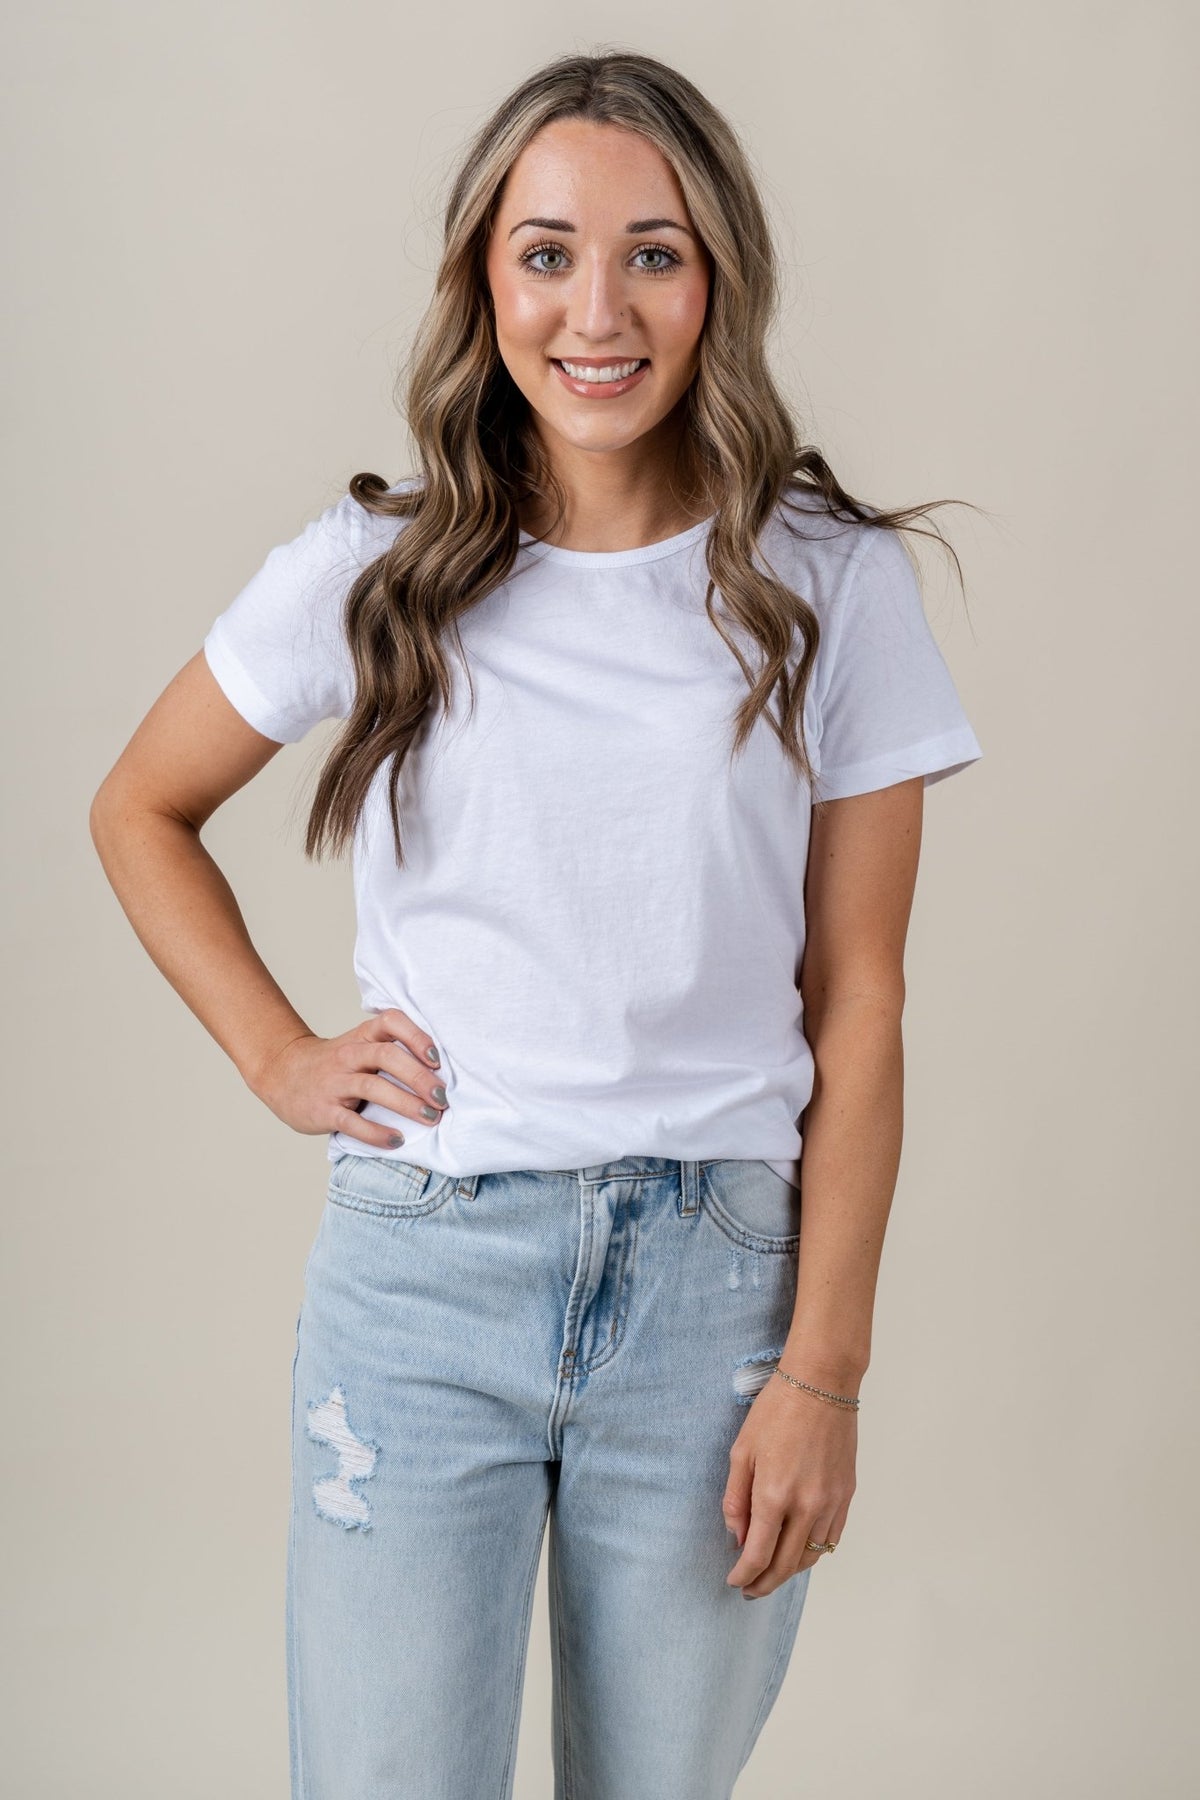 Z Supply classic short sleeve tee white - Z Supply Top - Z Supply Tops, Dresses, Tanks, Tees, Cardigans, Joggers and Loungewear at Lush Fashion Lounge